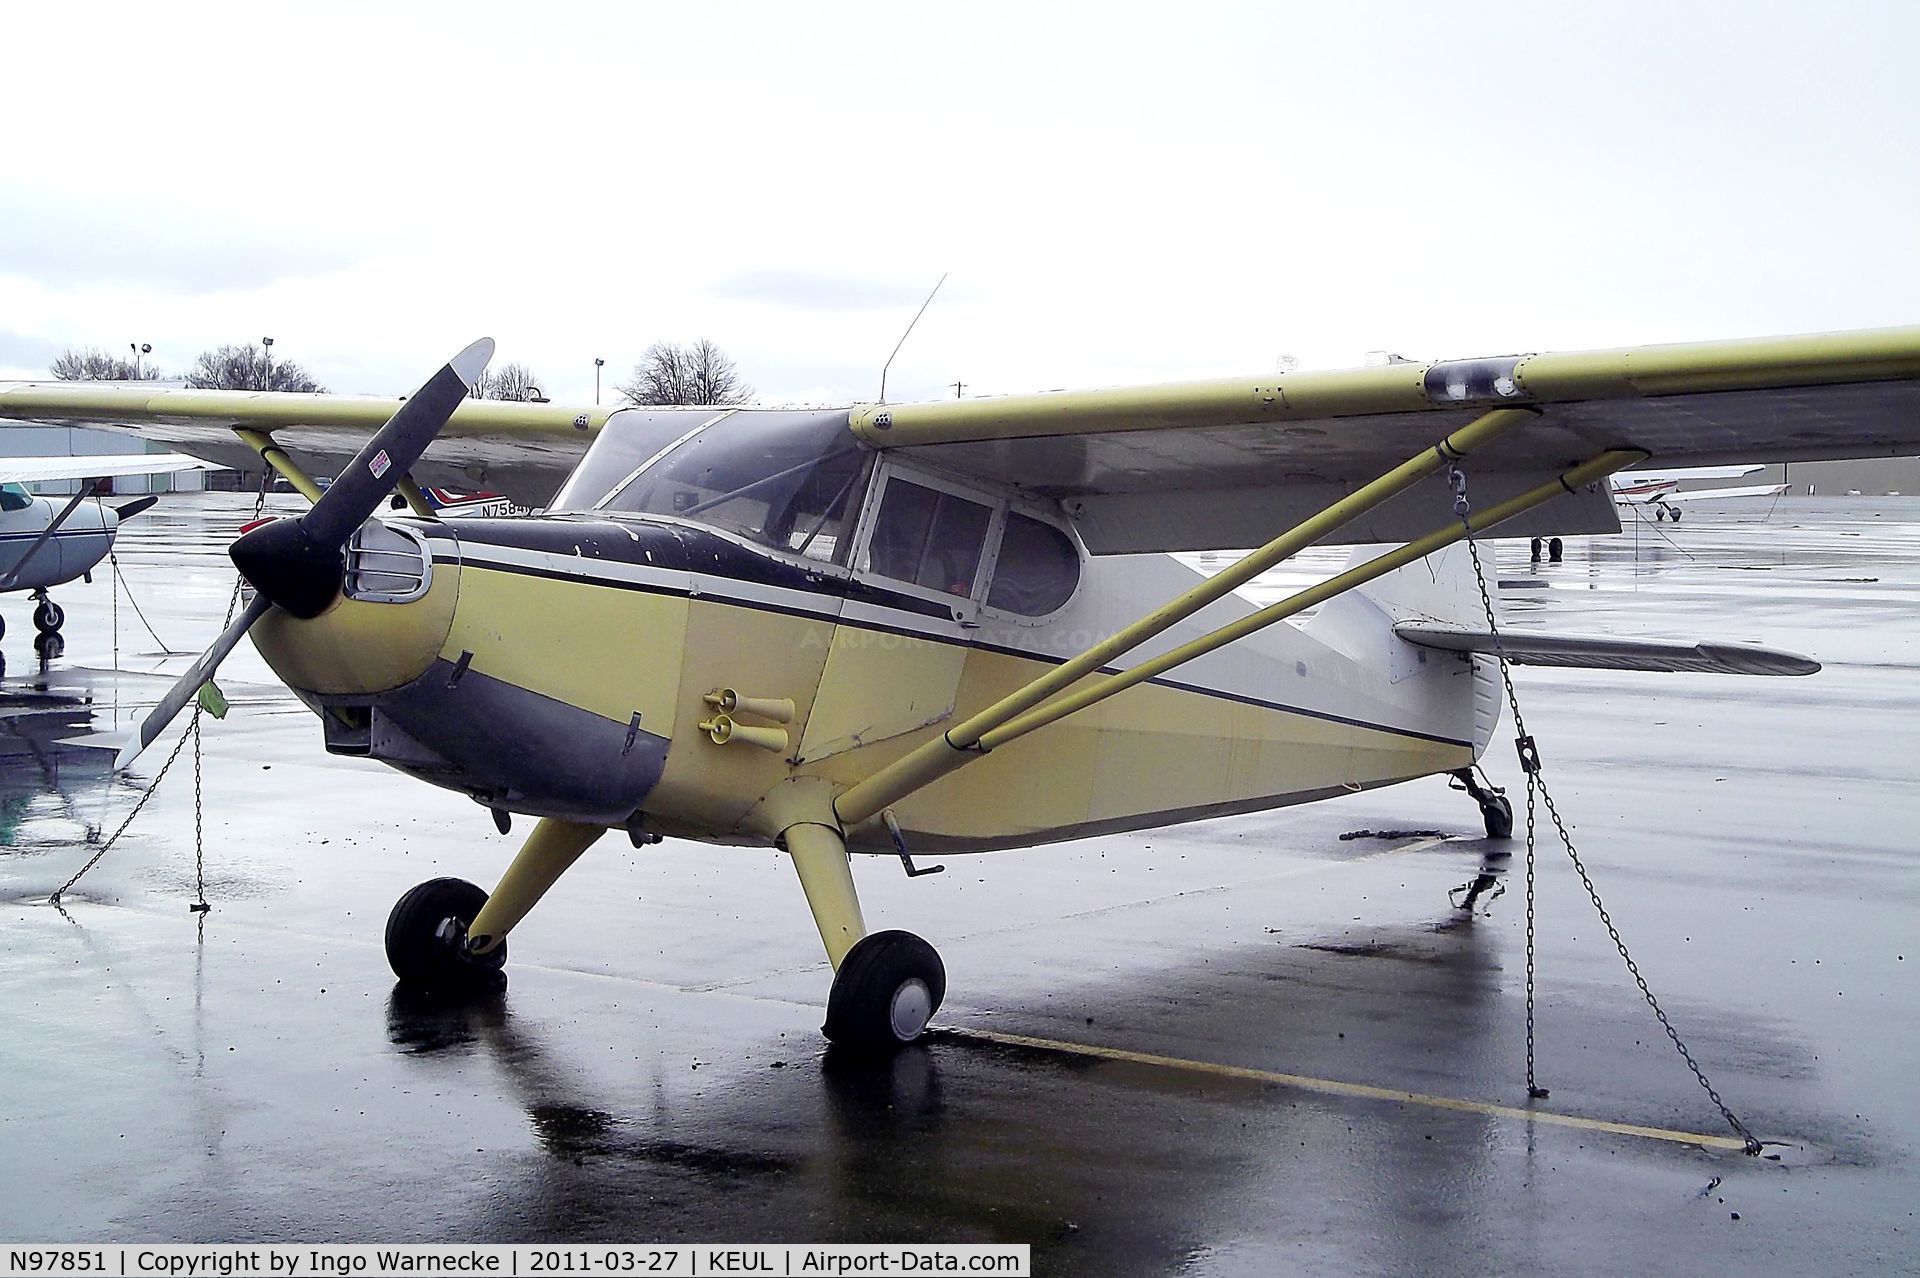 N97851, 1946 Stinson 108-1 Voyager C/N 108-851, Stinson 108-1 Voyager at Caldwell Industrial airport, Caldwell ID